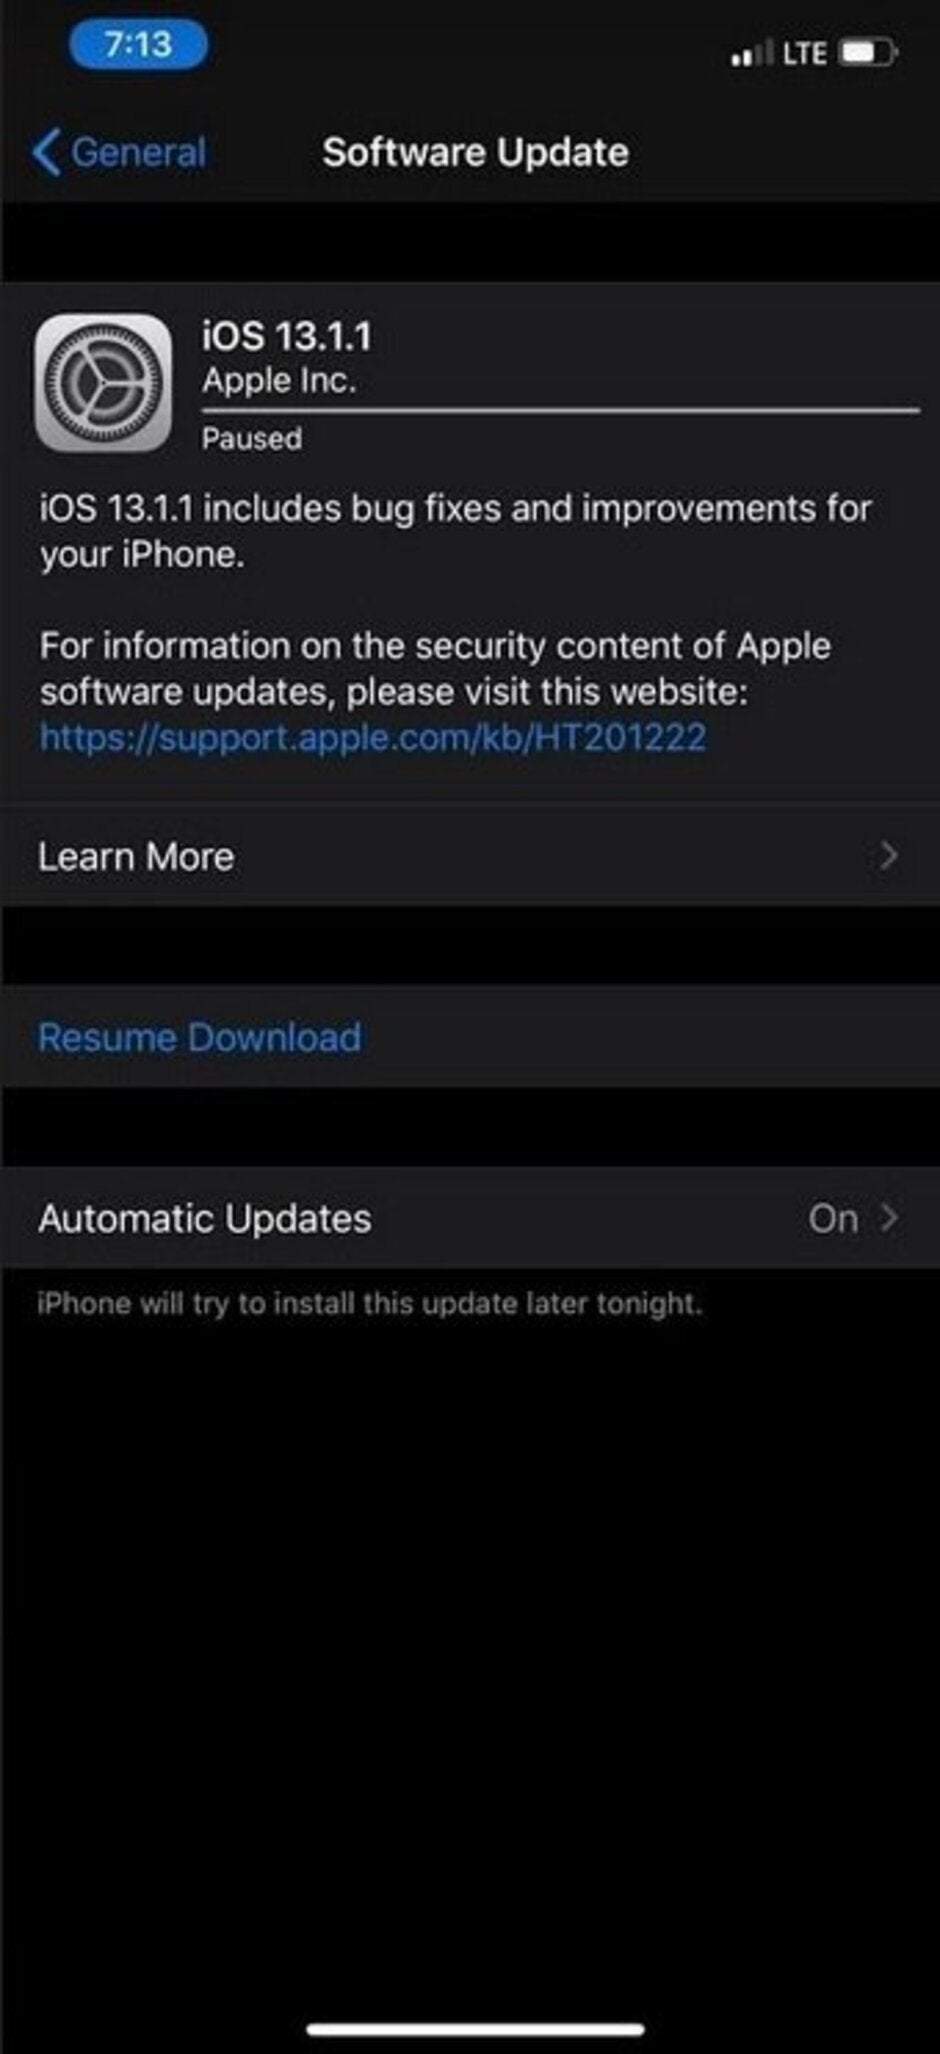 Apple has pushed out iOS 13.1.1 - Apple drops minor update that iPhone users need to install now